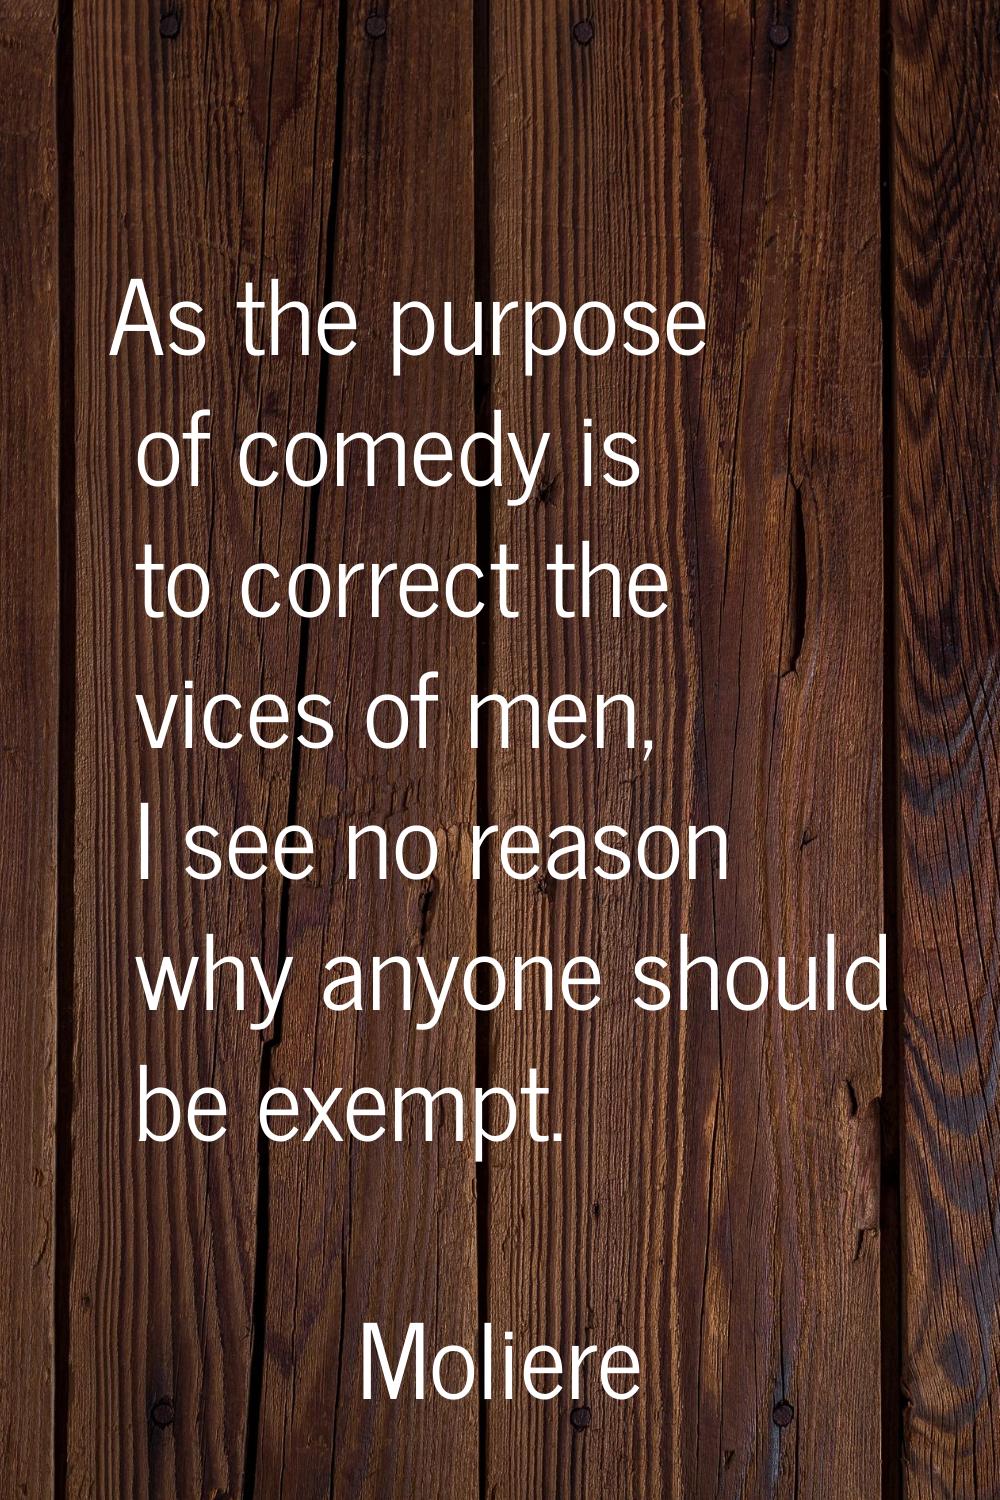 As the purpose of comedy is to correct the vices of men, I see no reason why anyone should be exemp